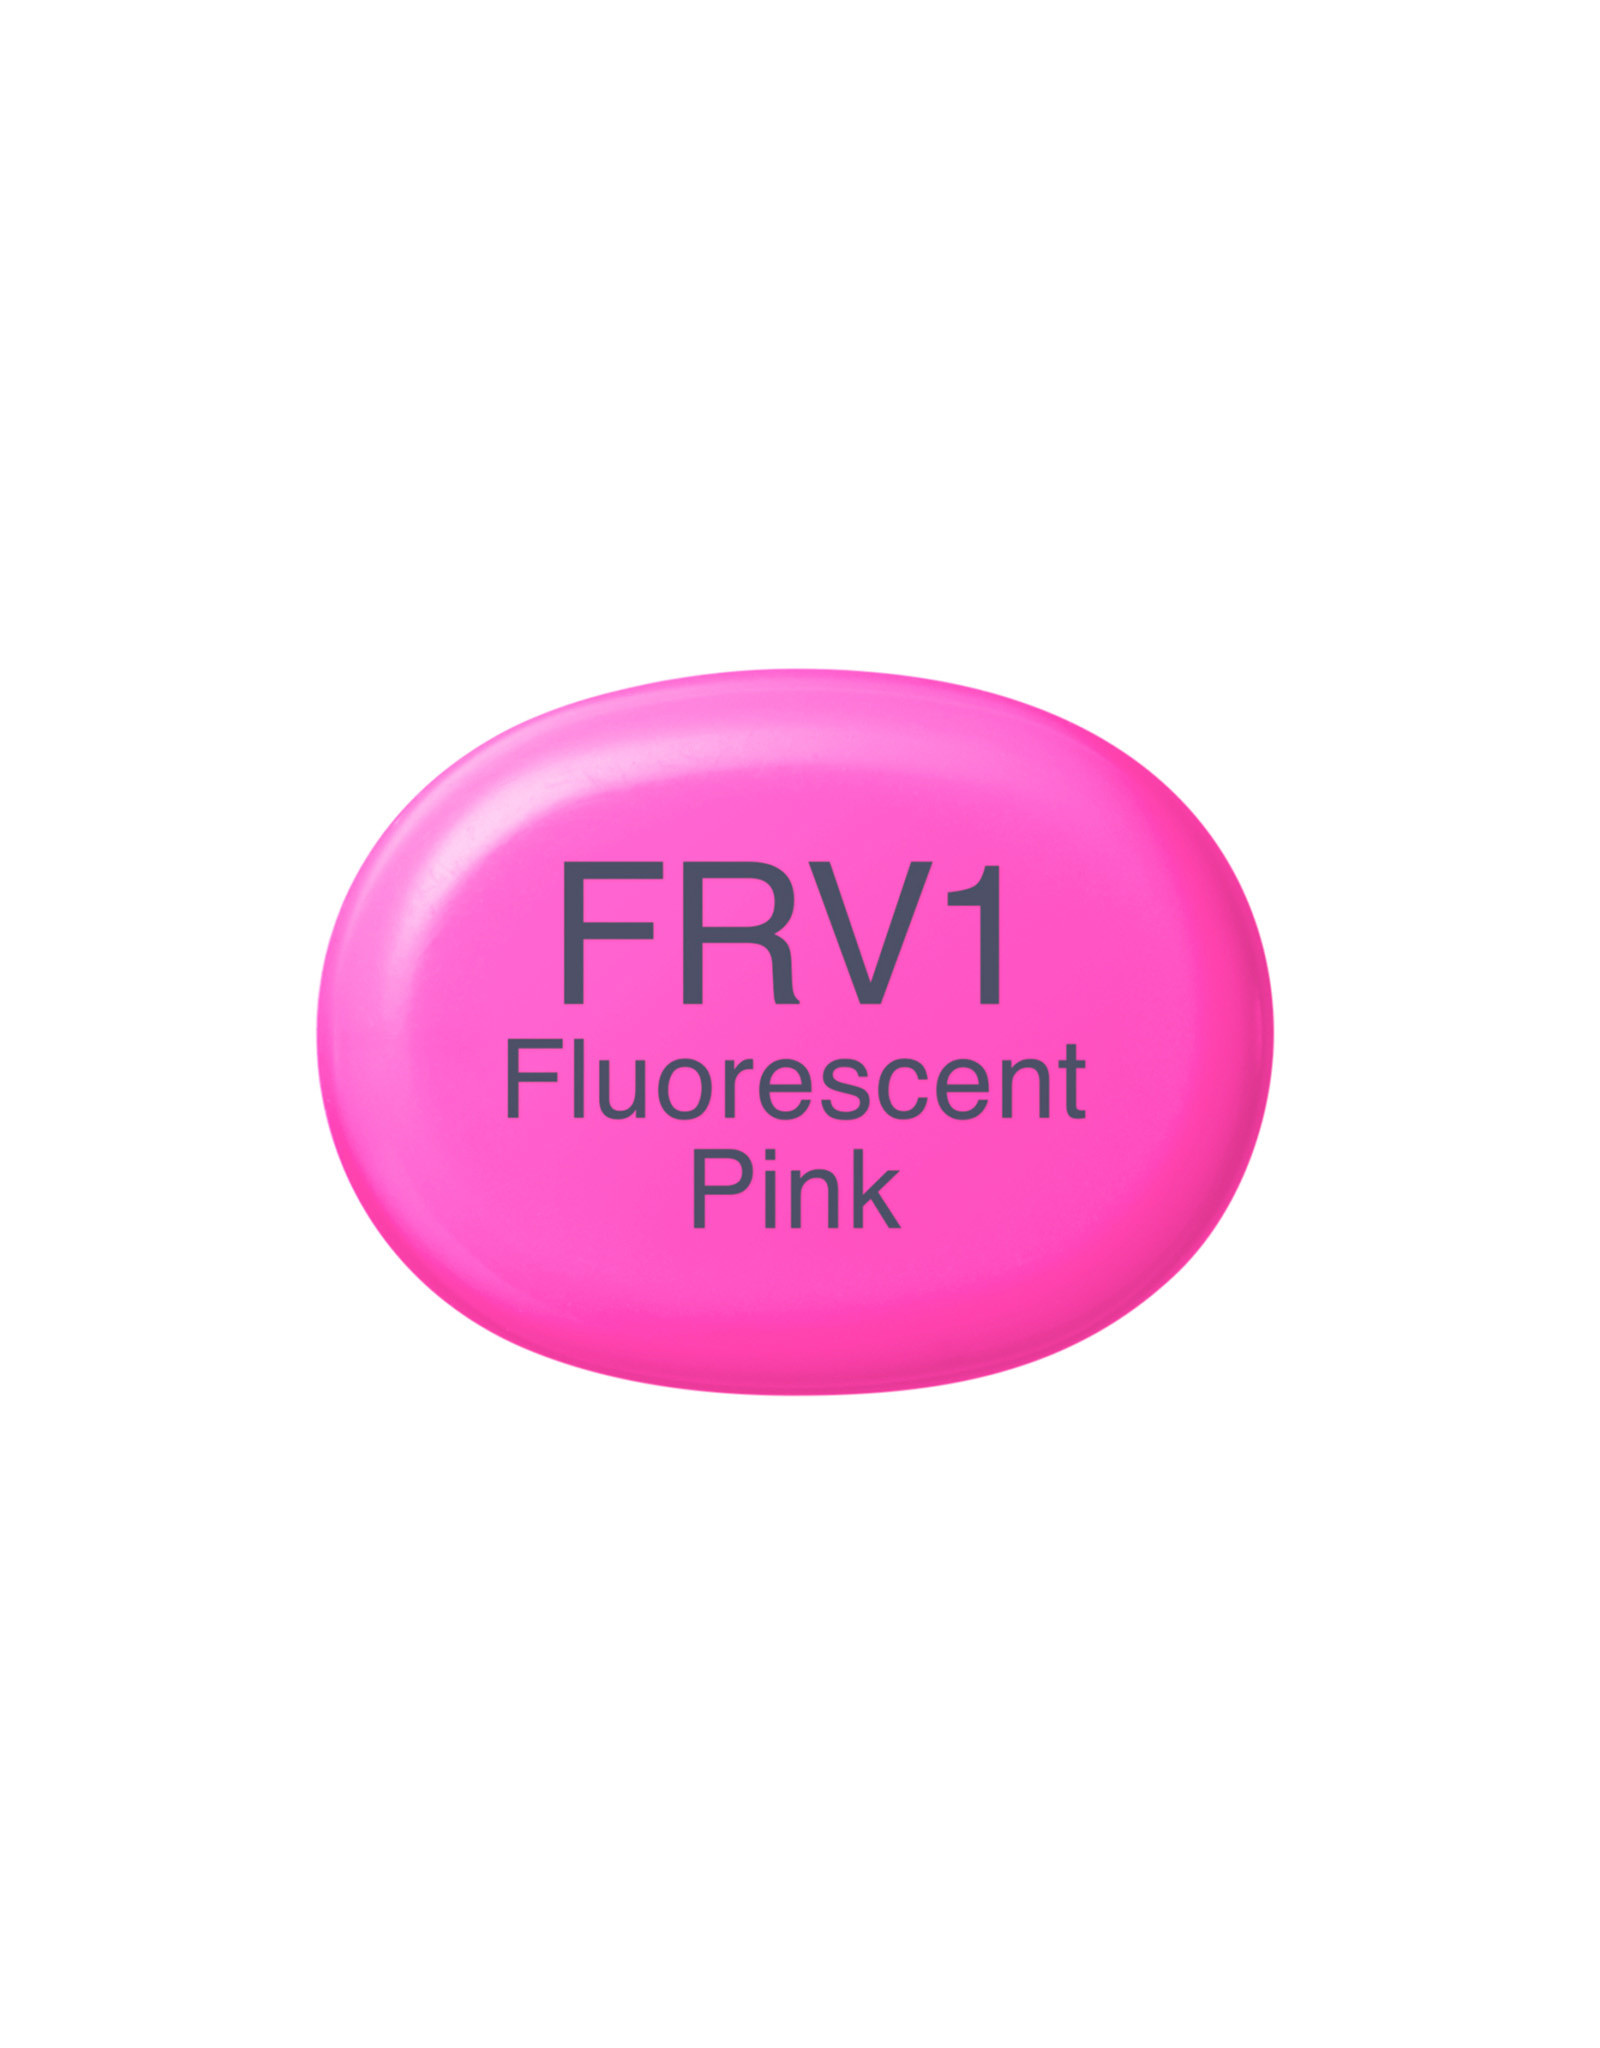 COPIC COPIC Sketch Marker FRV1 Fluorescent Pink